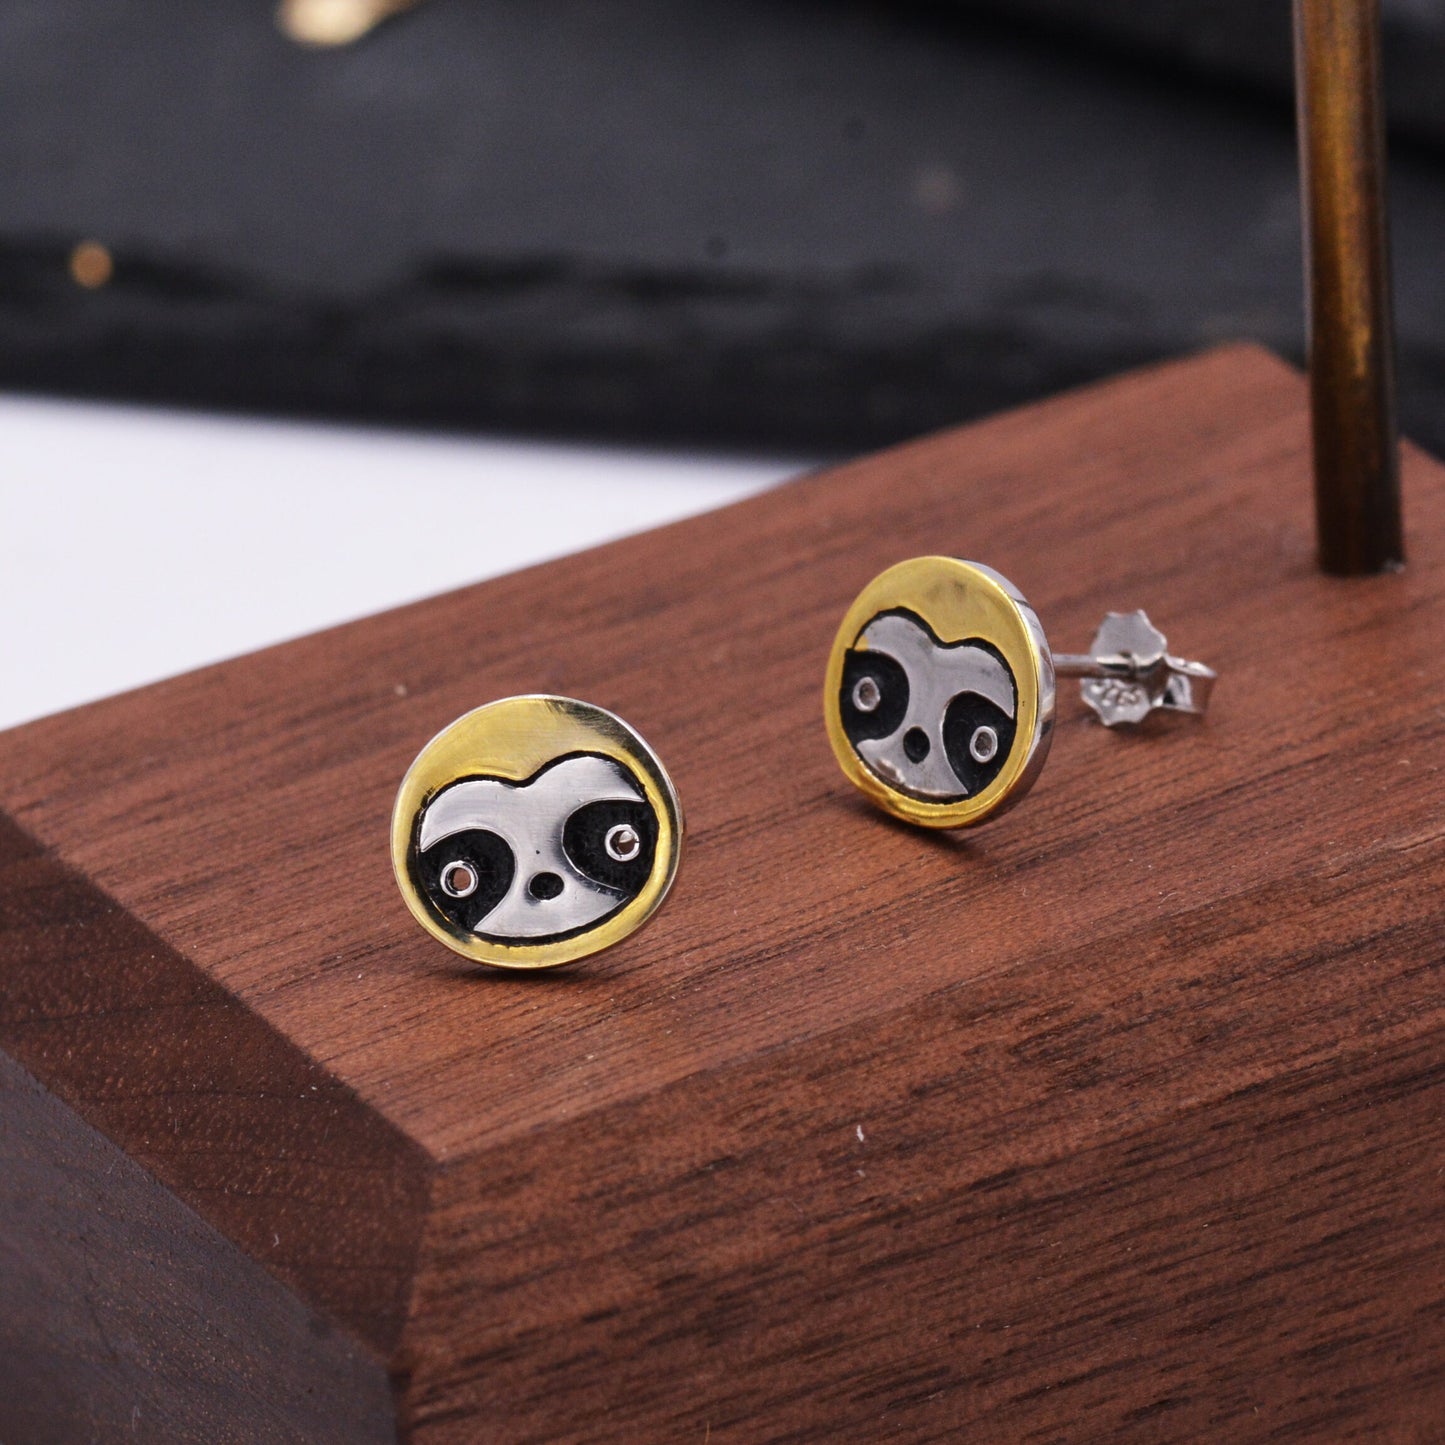 Sloth Stud Earrings in Sterling Silver,  Cute Fun Quirky Monkey Jewellery, Jewelry Gift for Her, Animal Lover, Nature Inspired L9